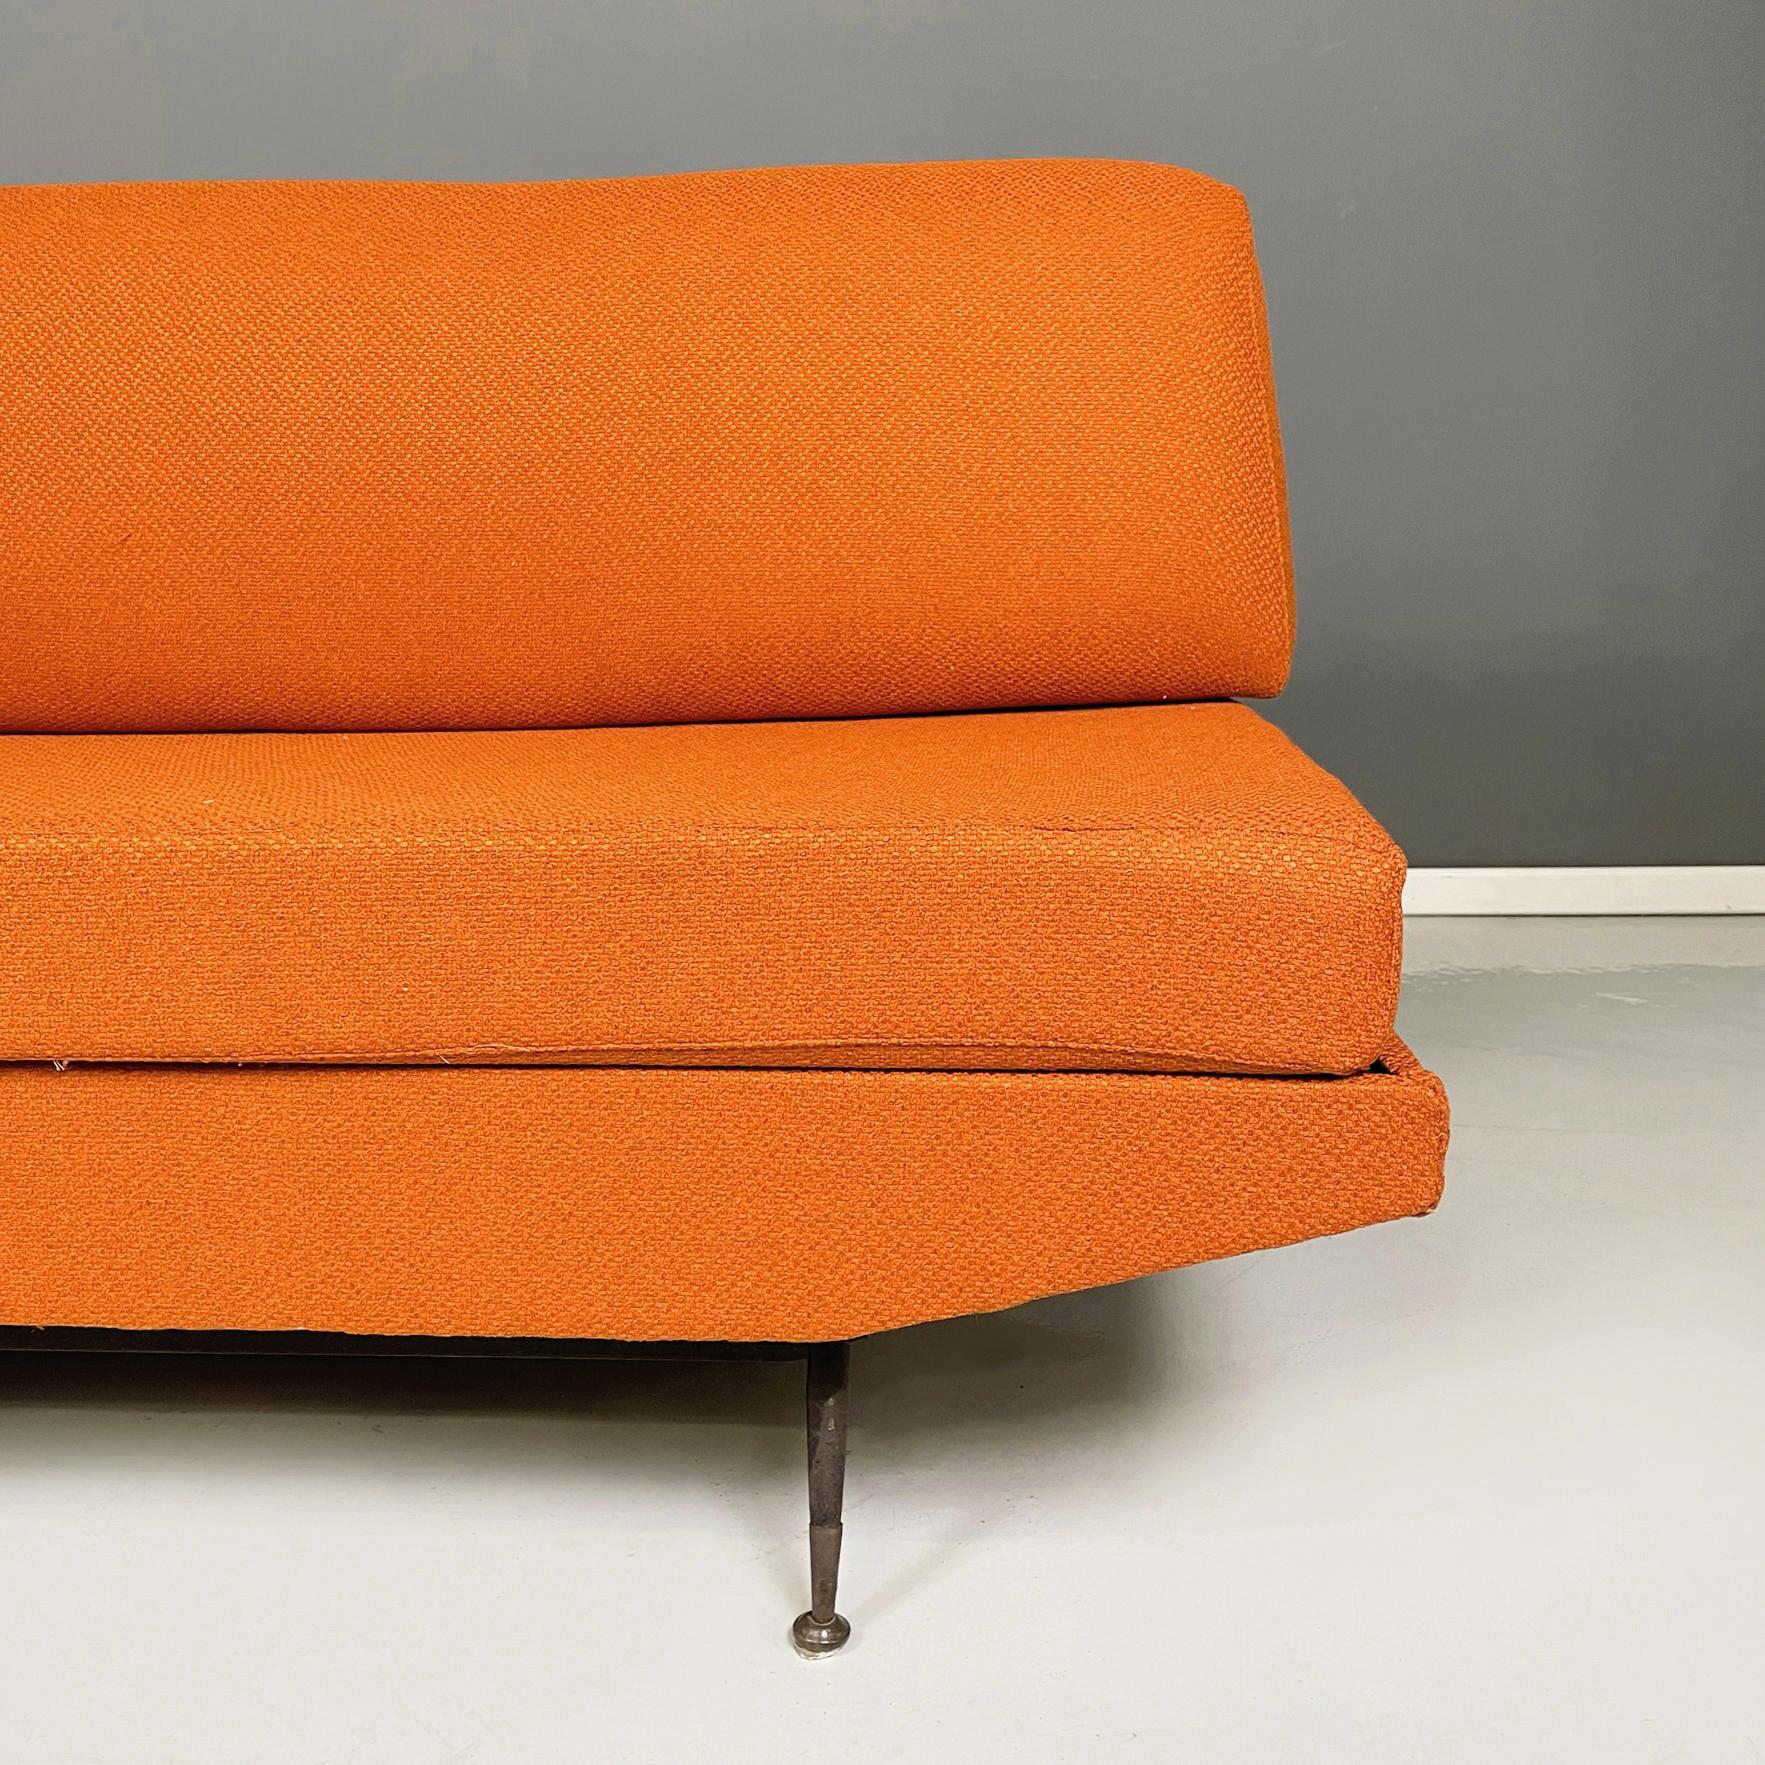 Italian Mid-Century Modern Sofa and Bed in orange Fabric and Black Metal, 1960s 5